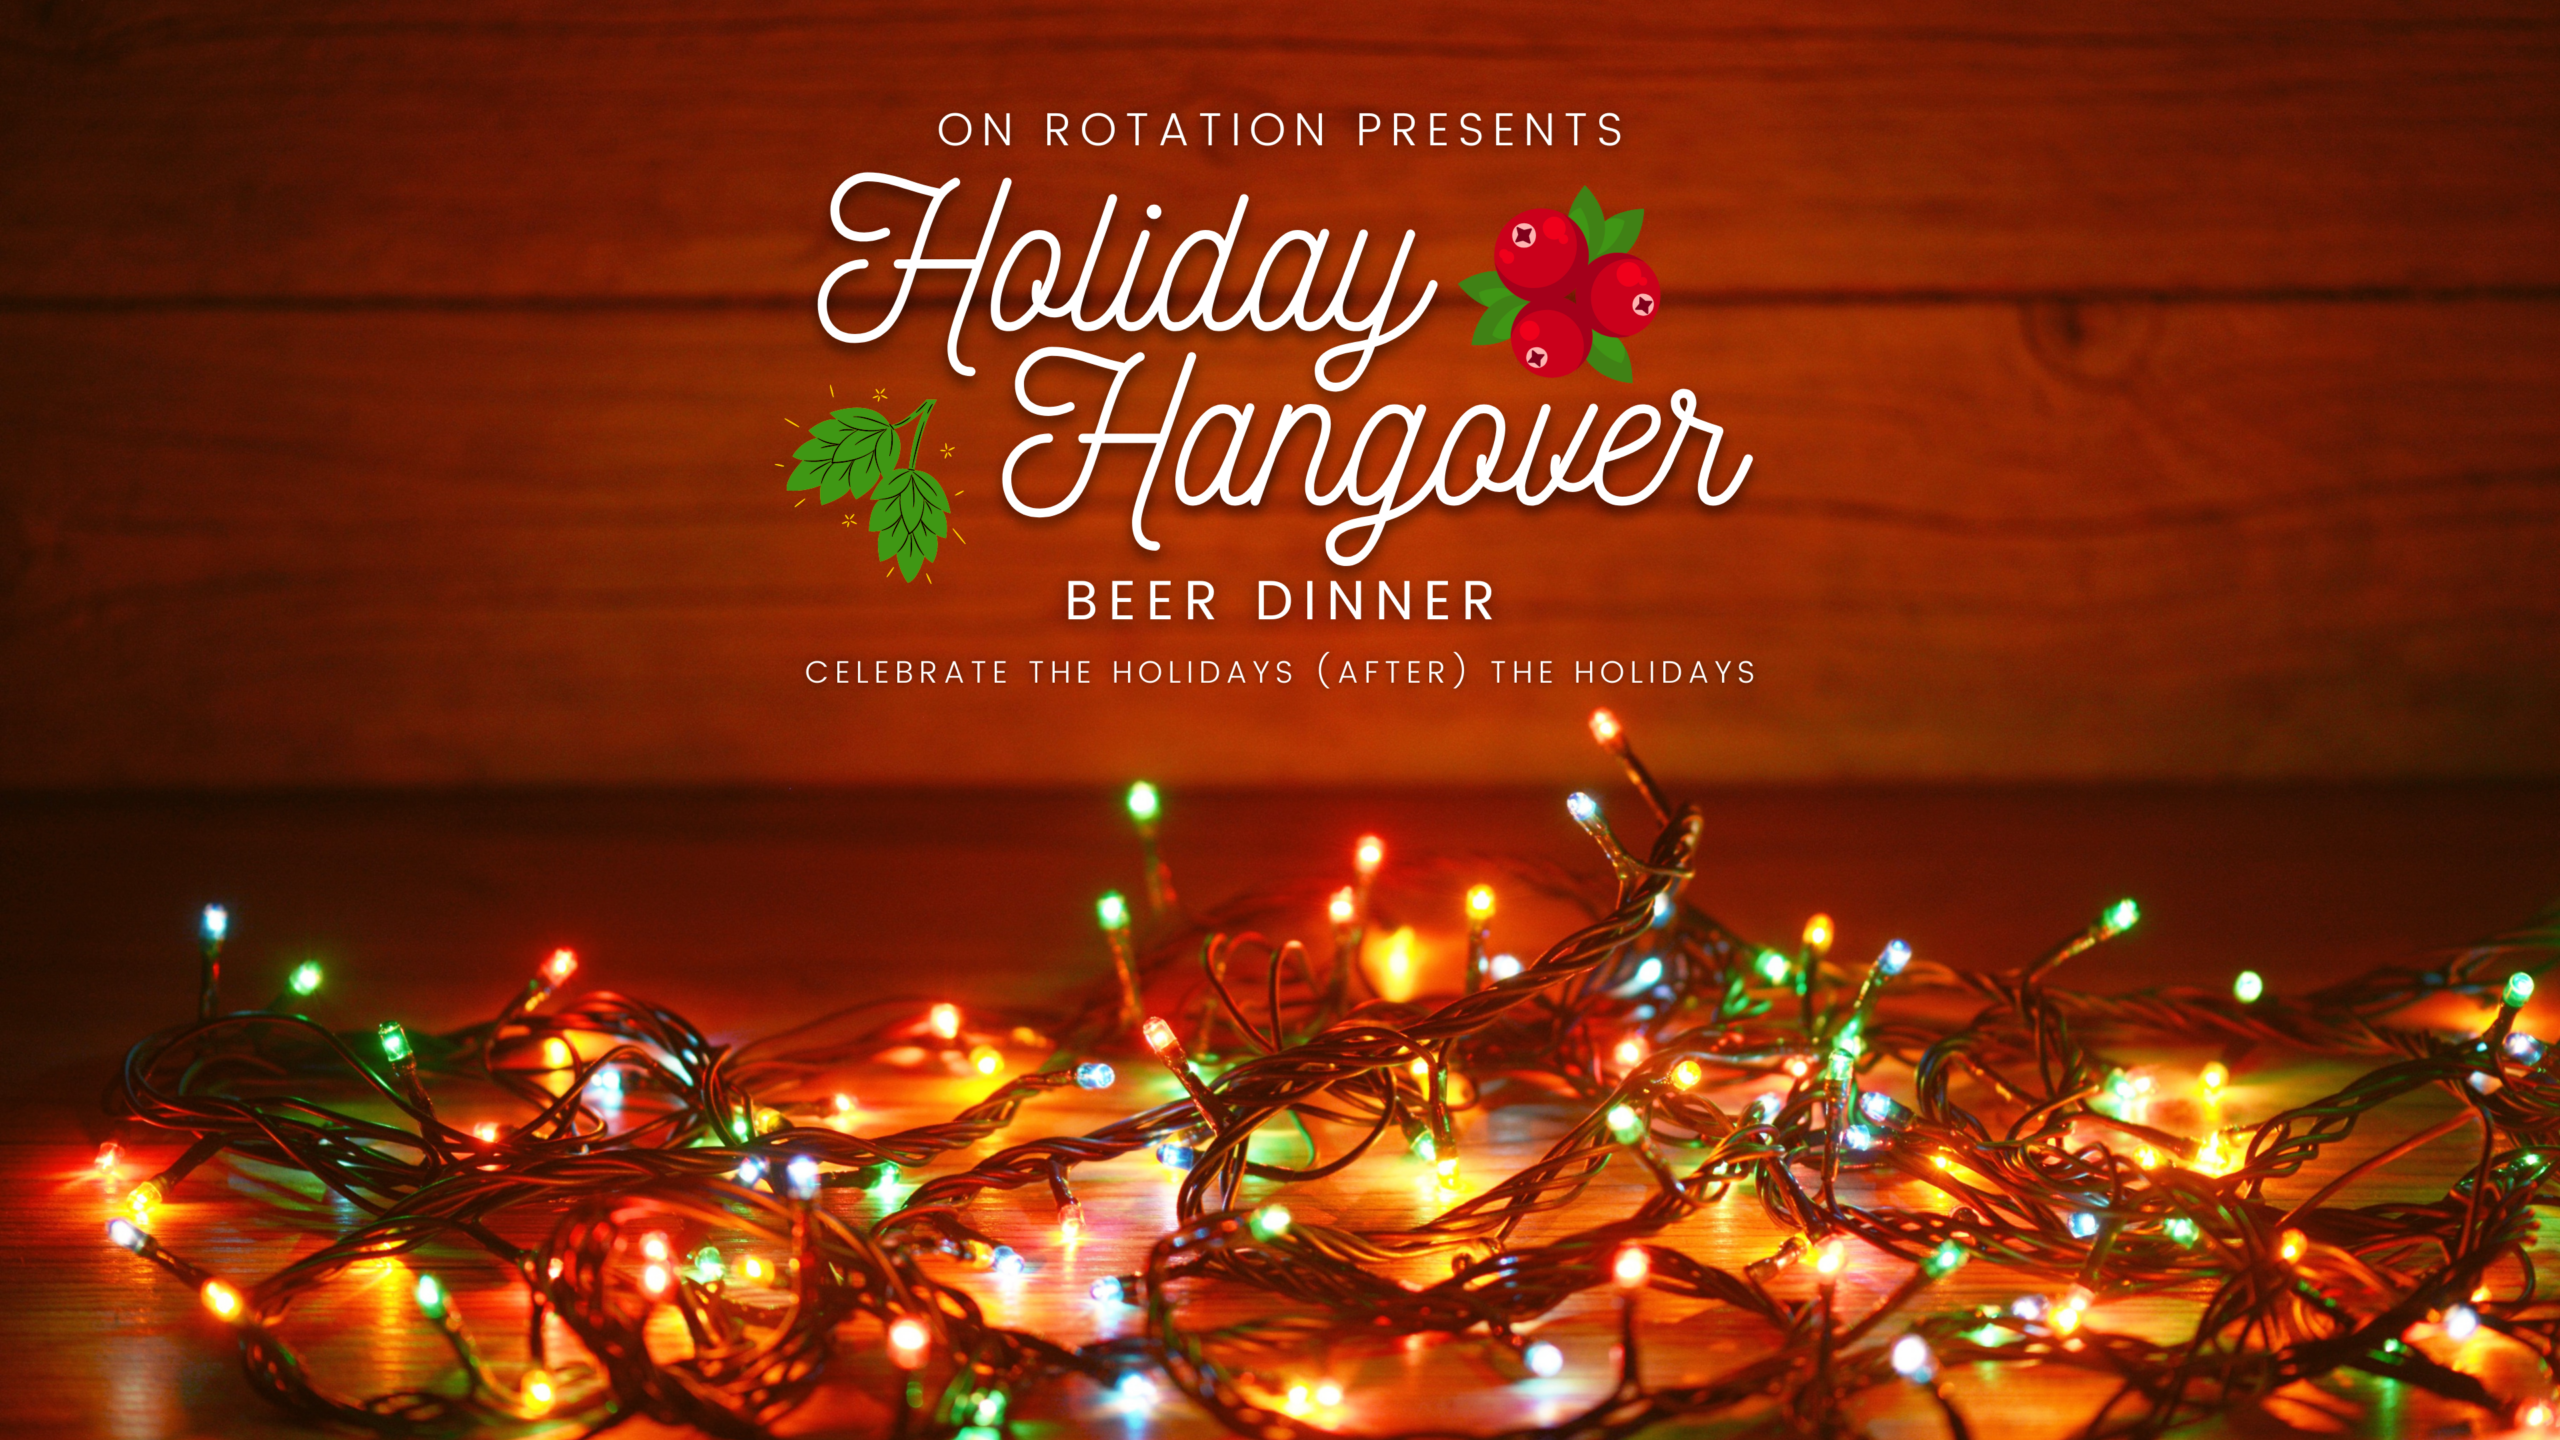 Holiday Hangover Beer Dinner at On Rotation